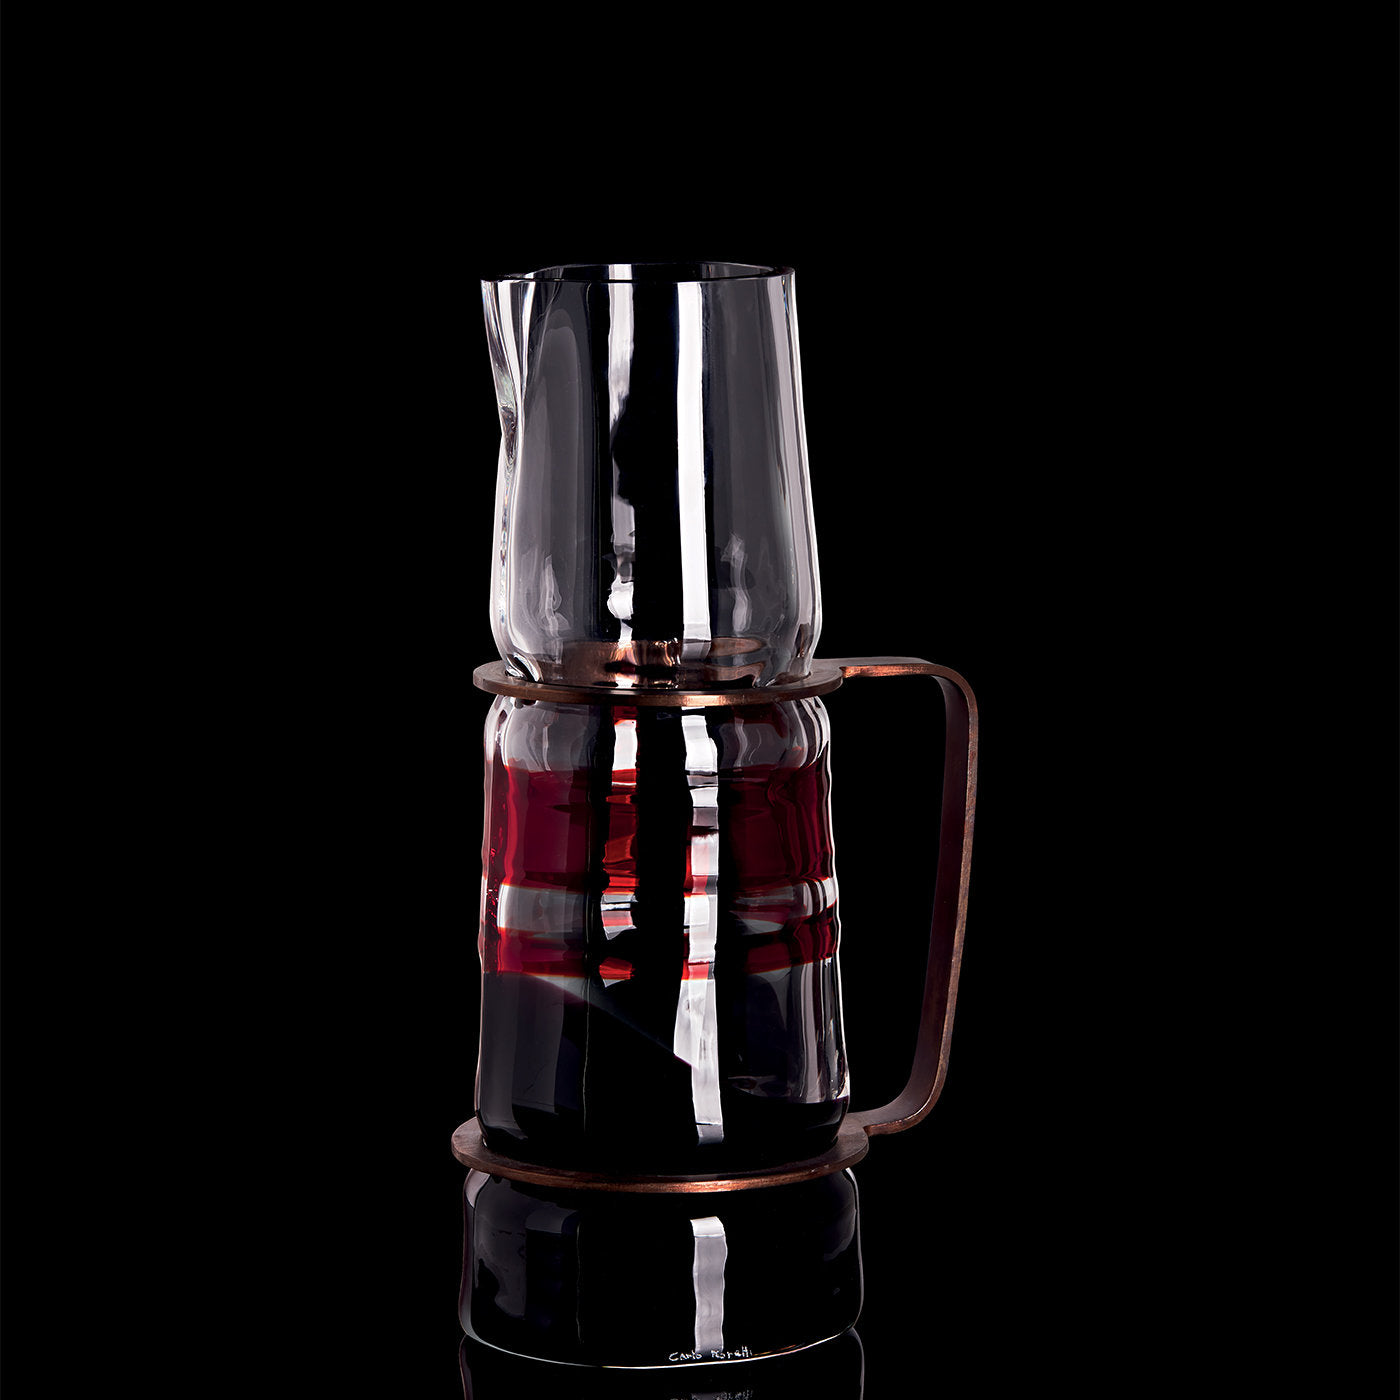 Talea Pitcher Black and Red - Alternative view 1